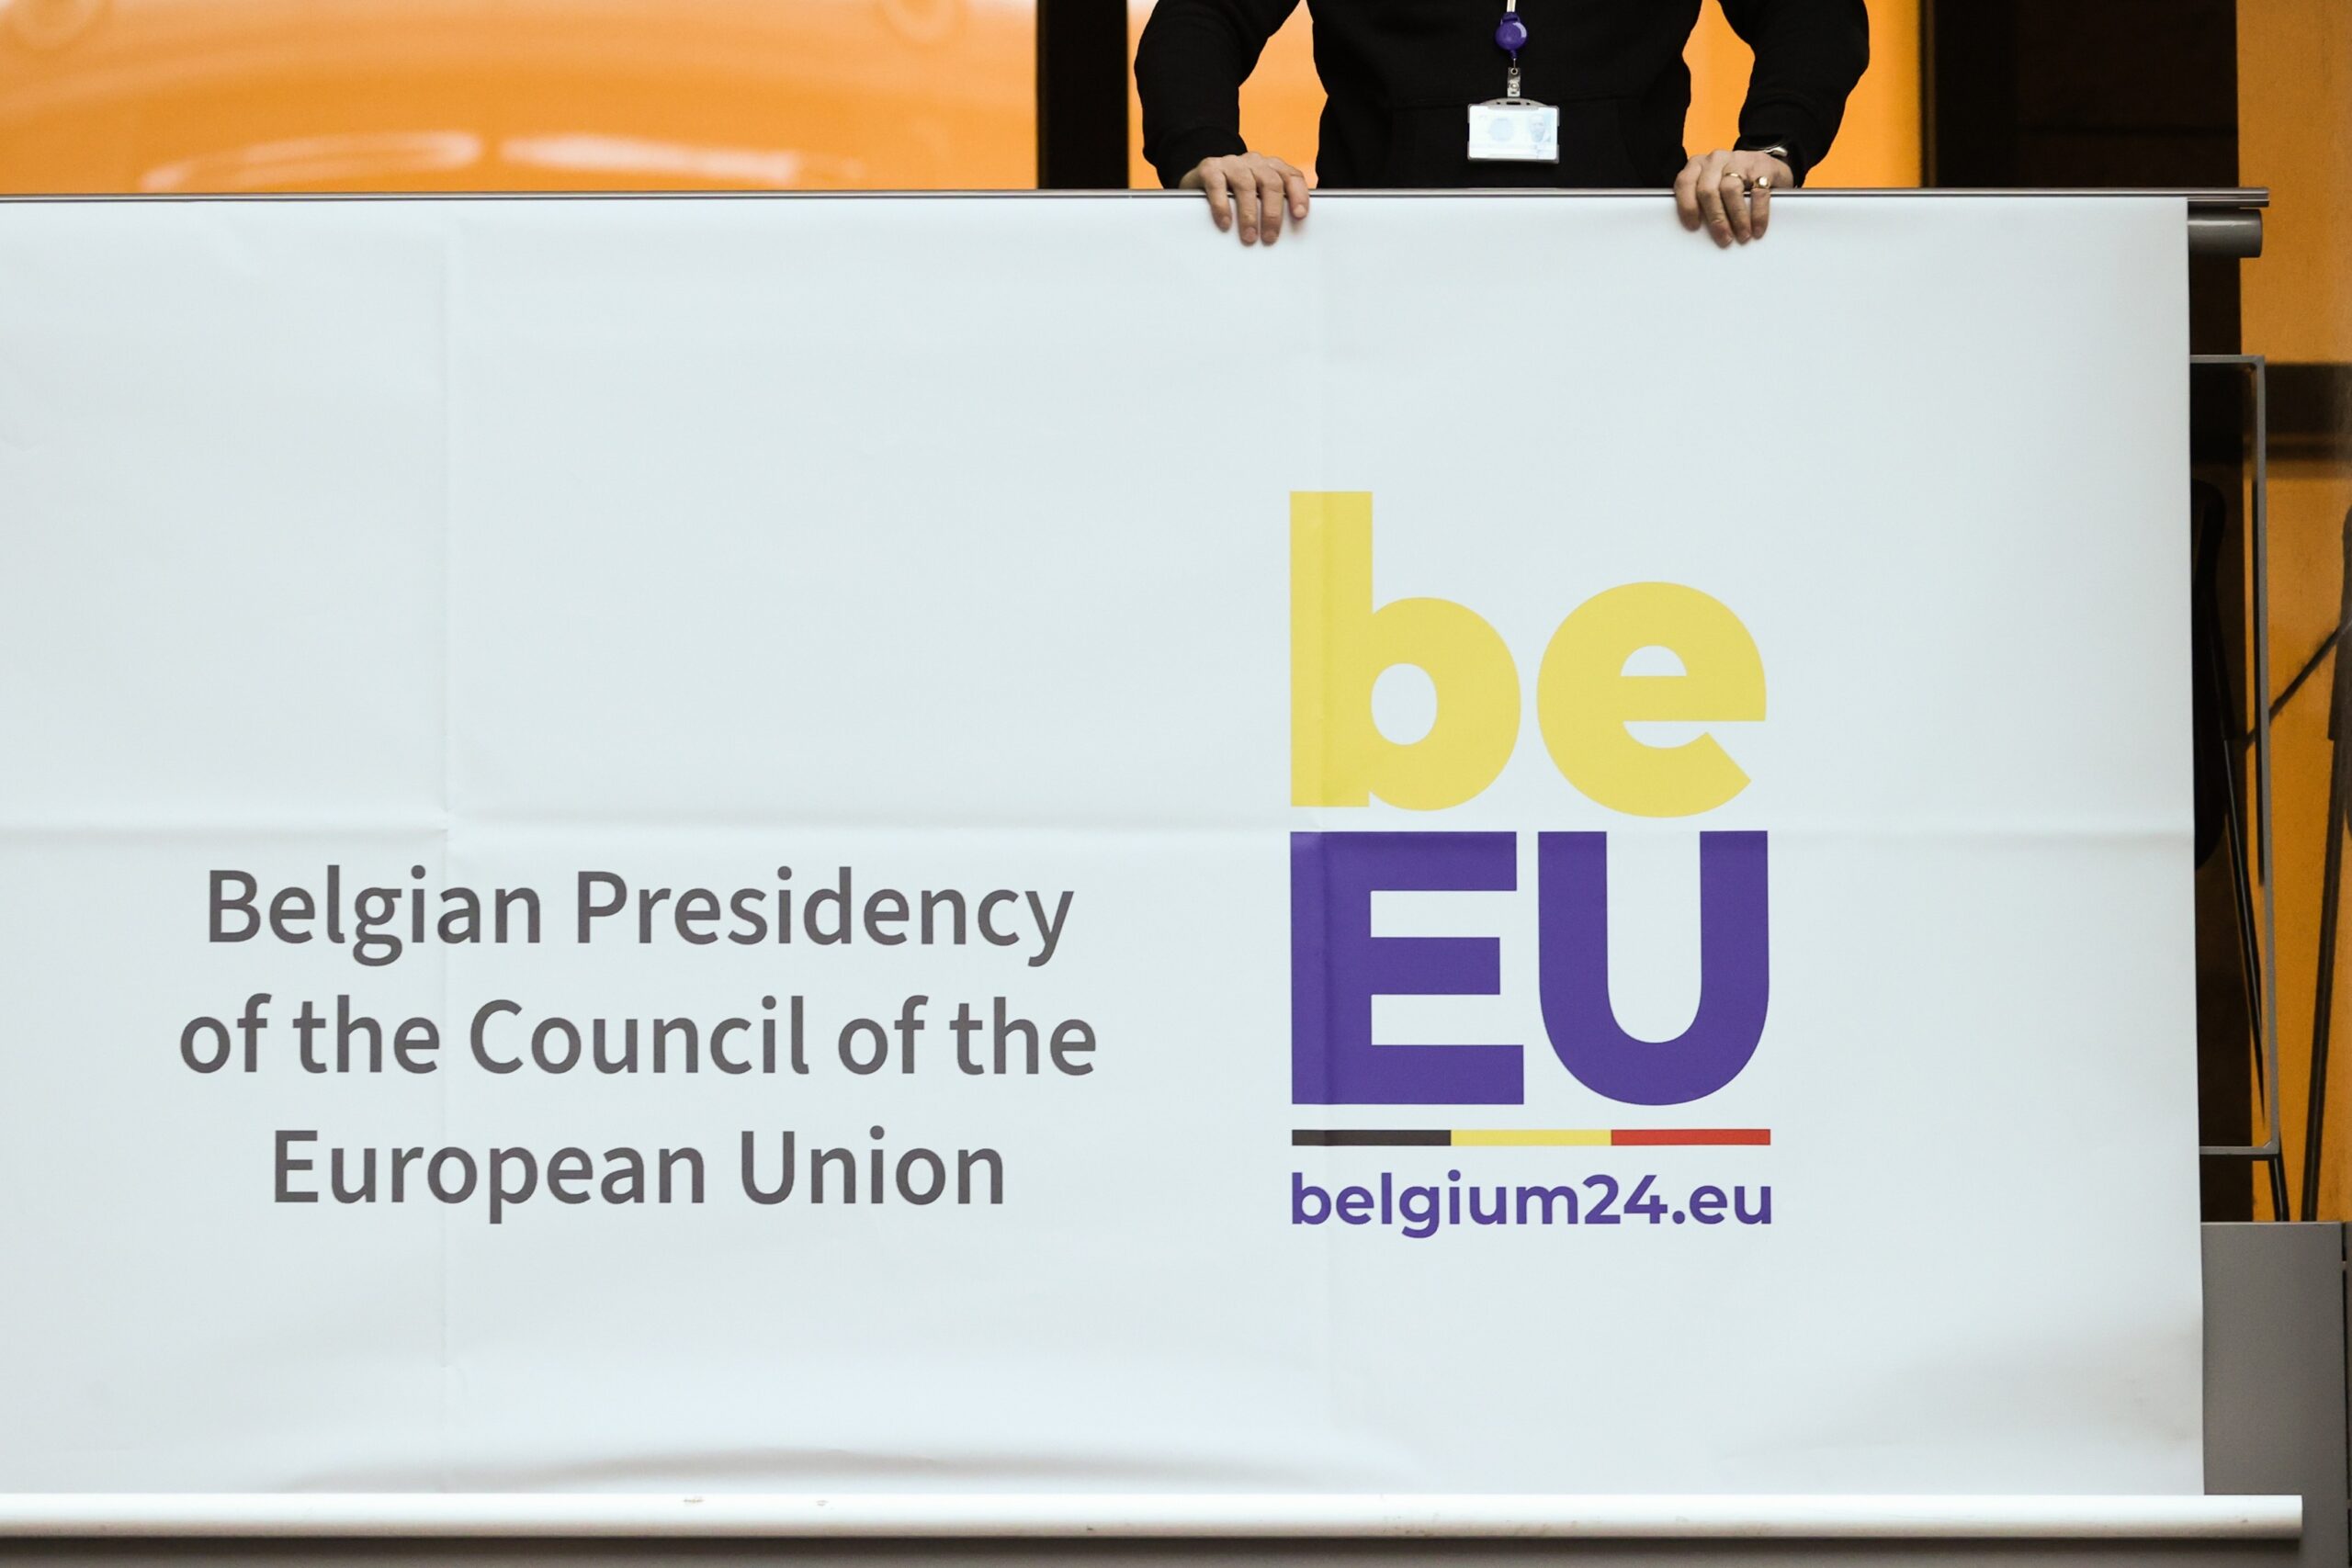 “Protect, strengthen, prepare”: The Belgian Presidency’s priorities outlined